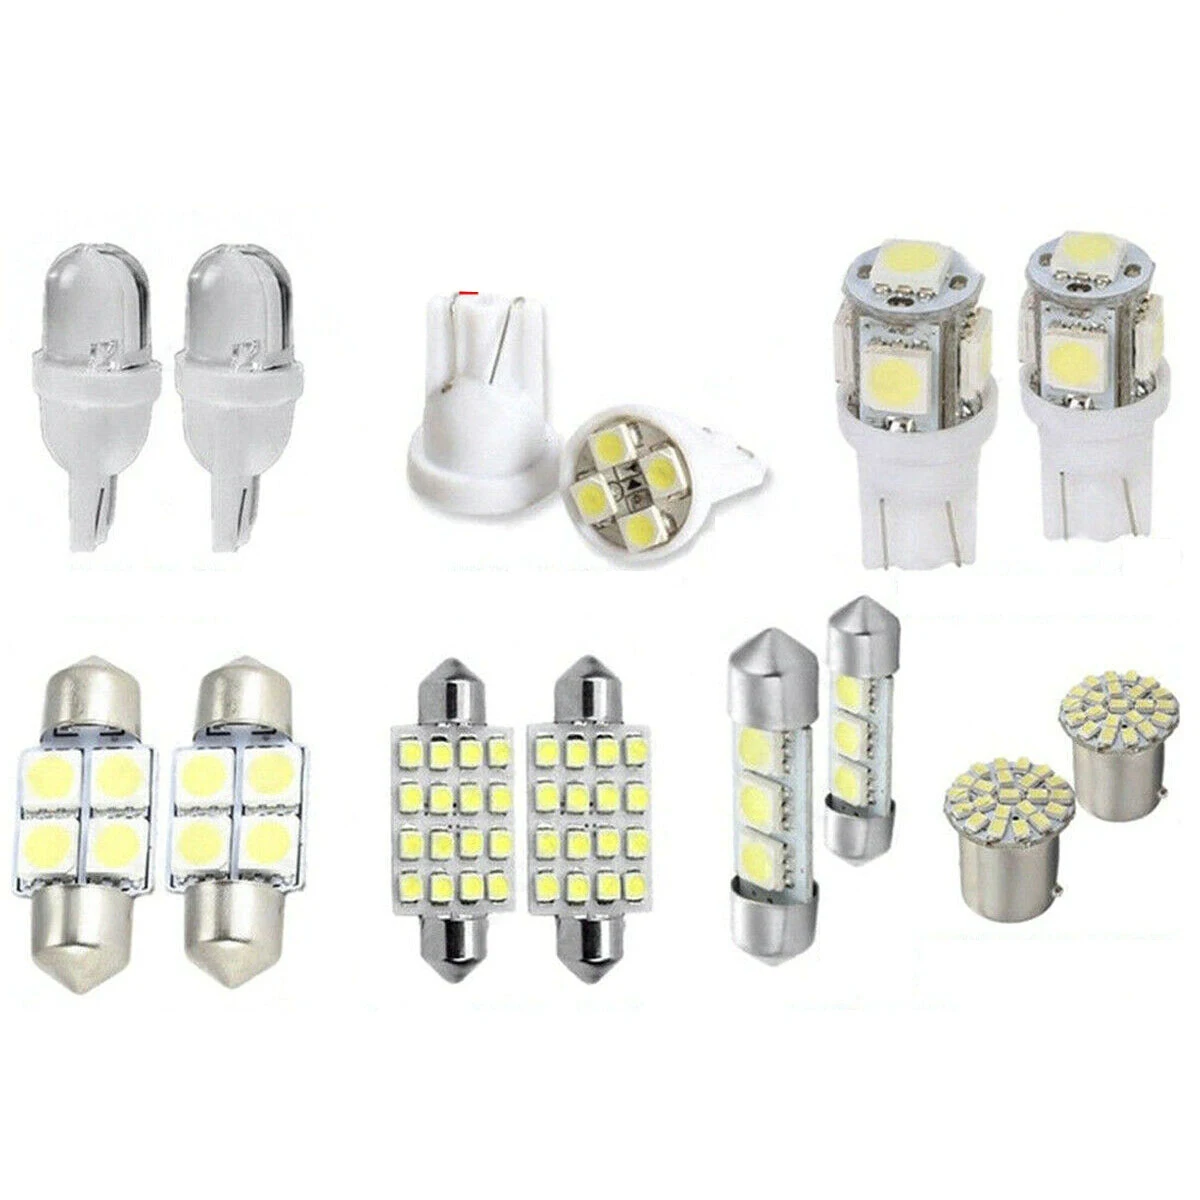 

14Pcs LED Interior Package Kit for T10 36mm Map Dome License Plate Lights White